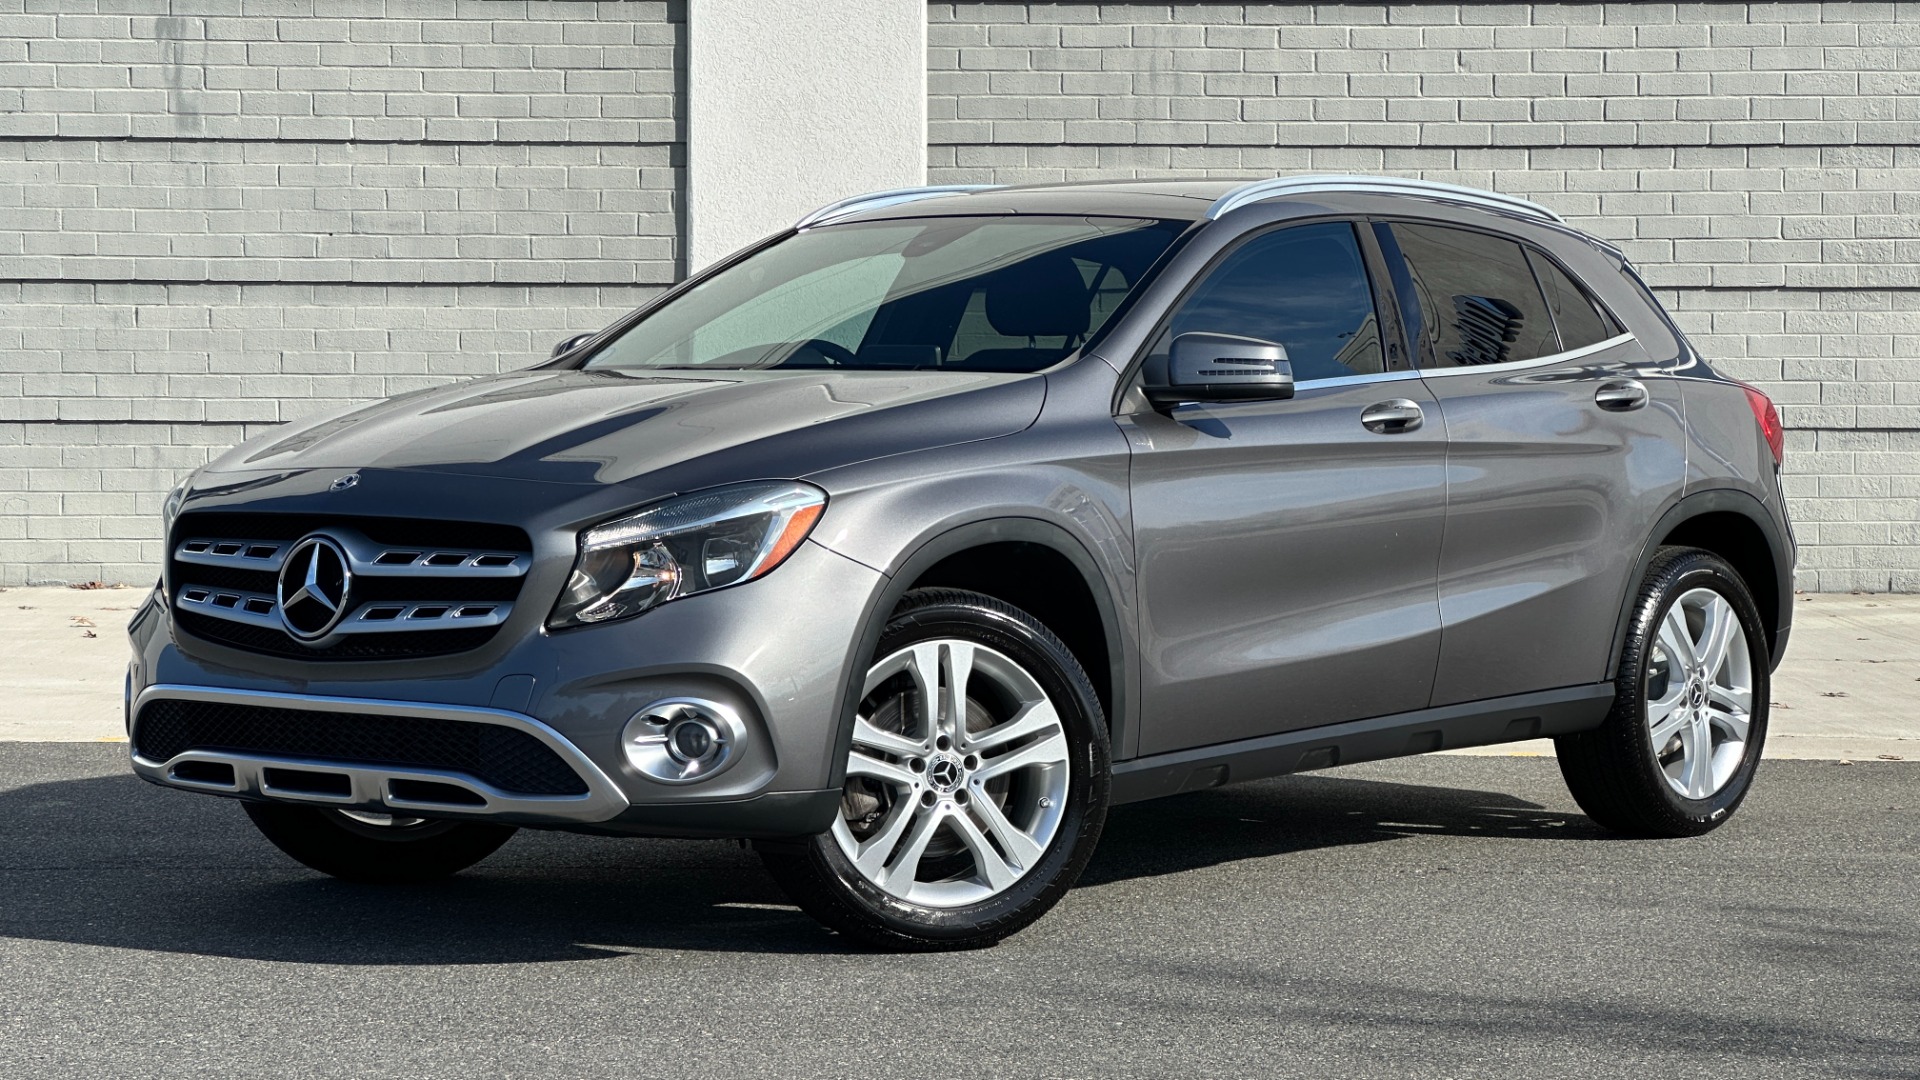 Used 2018 Mercedes-Benz GLA GLA 250 / PANORAMIC SUNROOF / BLIND SPOT ASSIST / HEATED FRONT SEATS for sale $27,999 at Formula Imports in Charlotte NC 28227 1